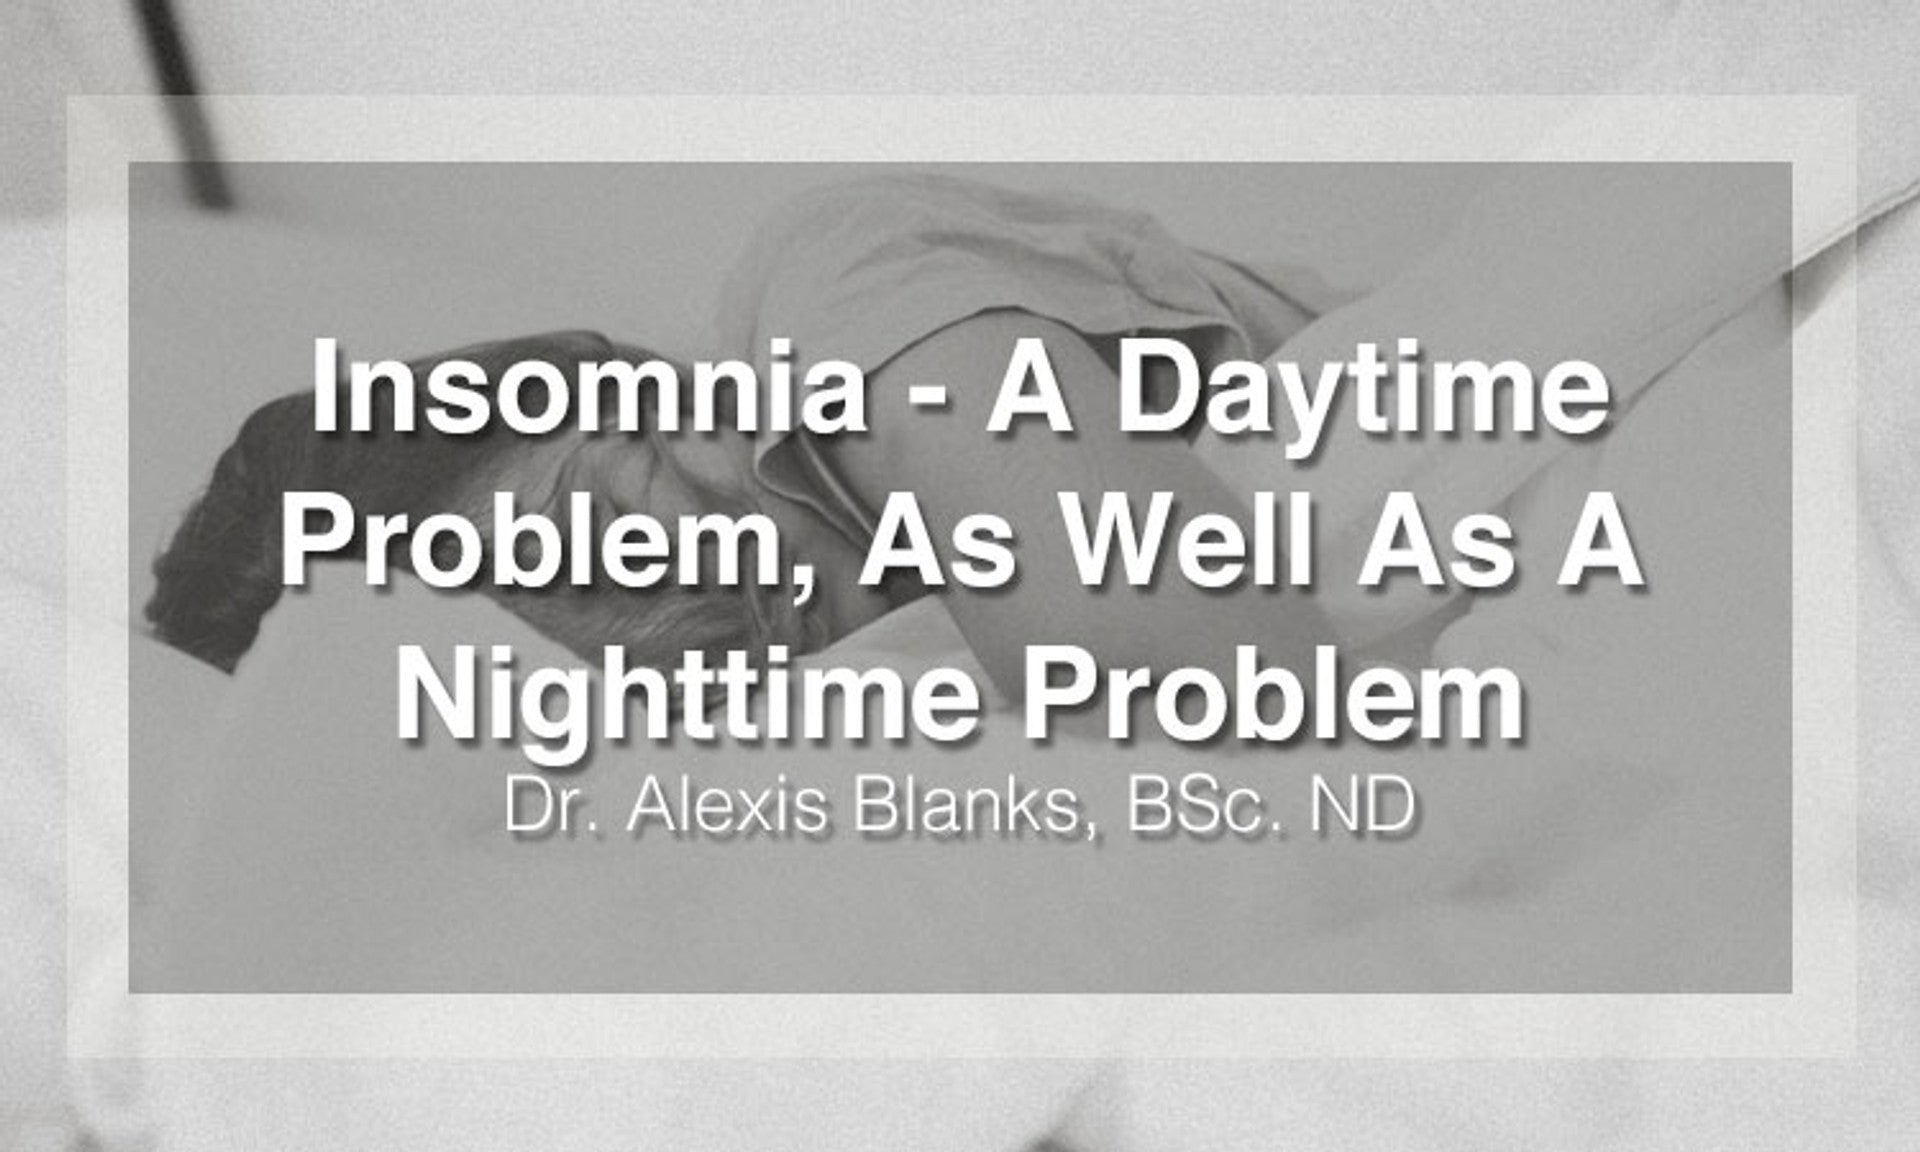 Insomnia - A Daytime Problem As Well As A Nighttime Problem.